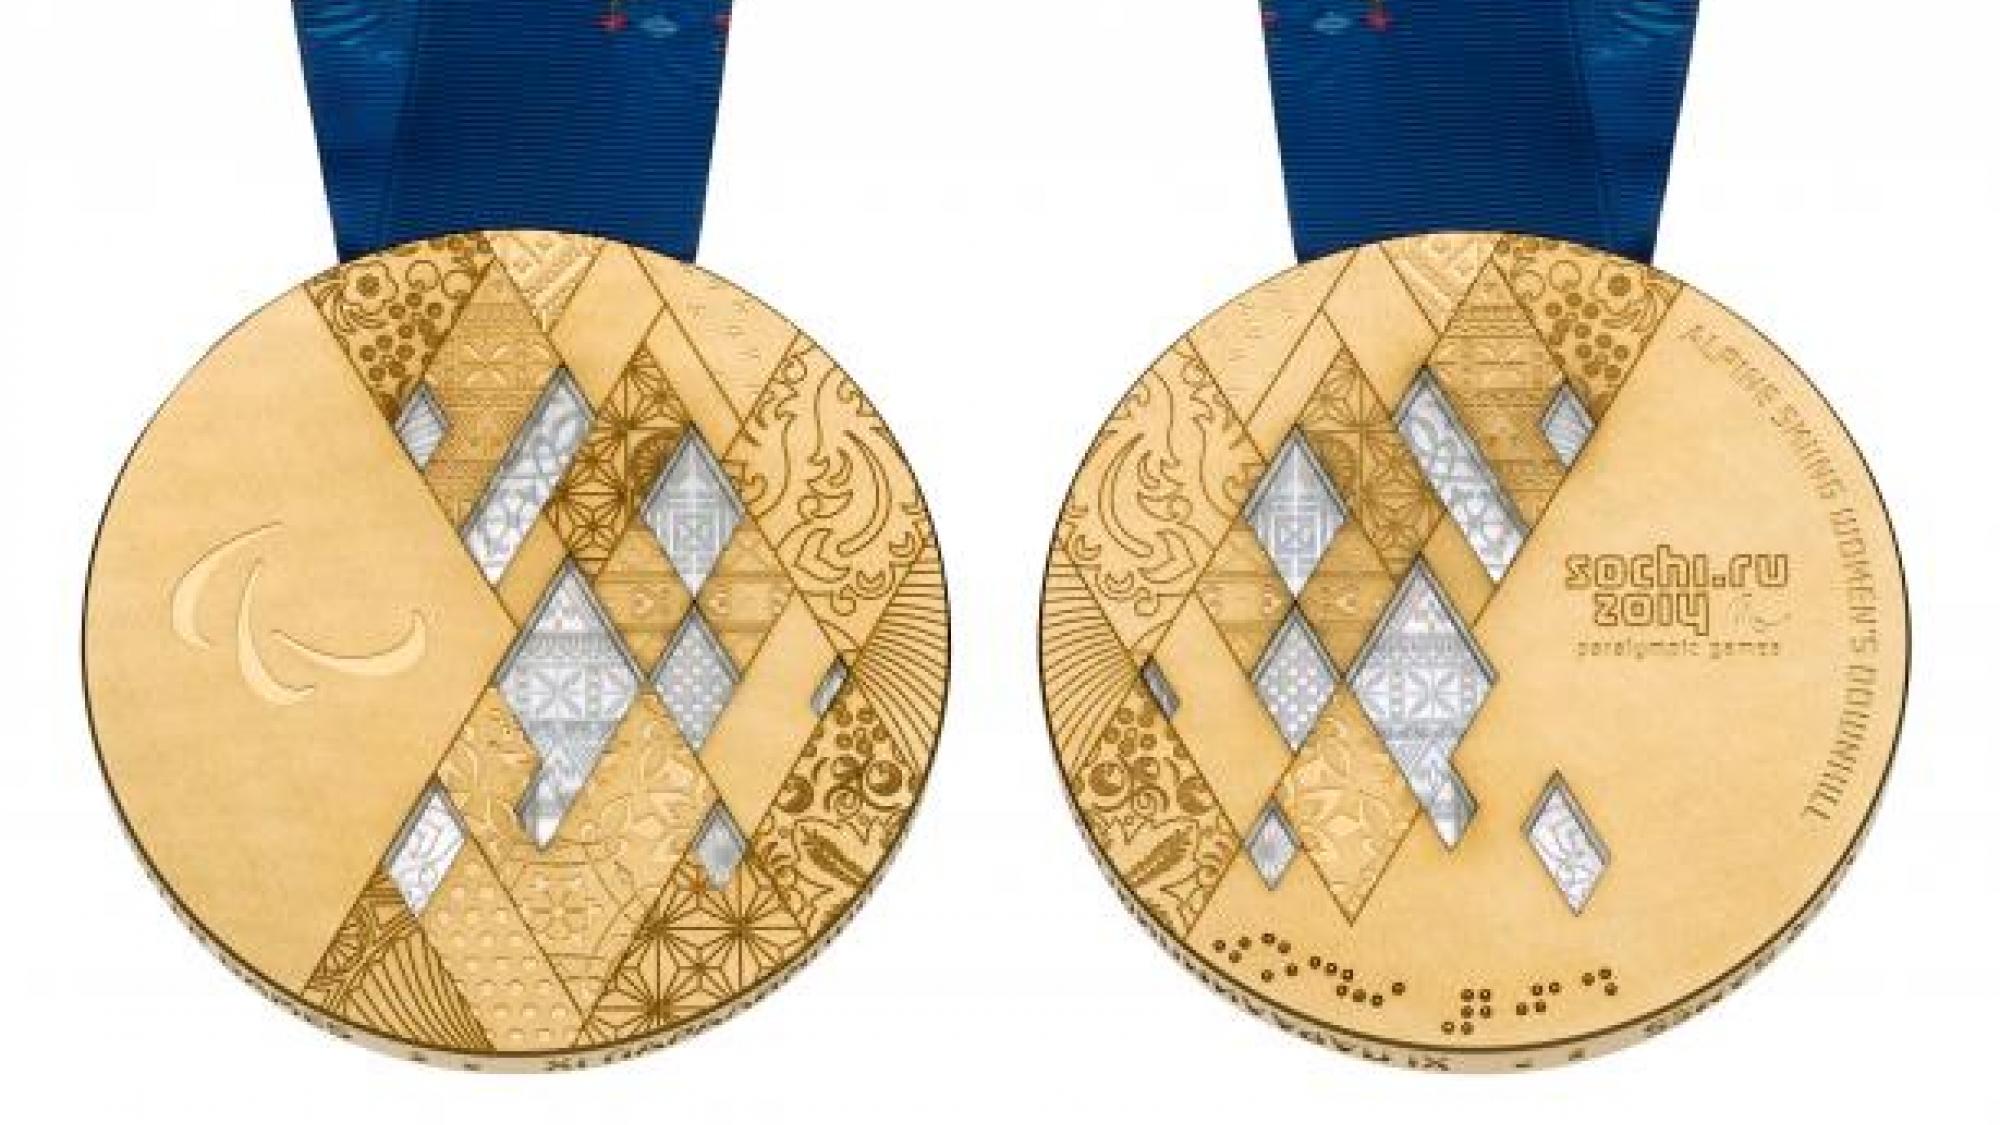 Sochi 2014 Paralympic Winter medals